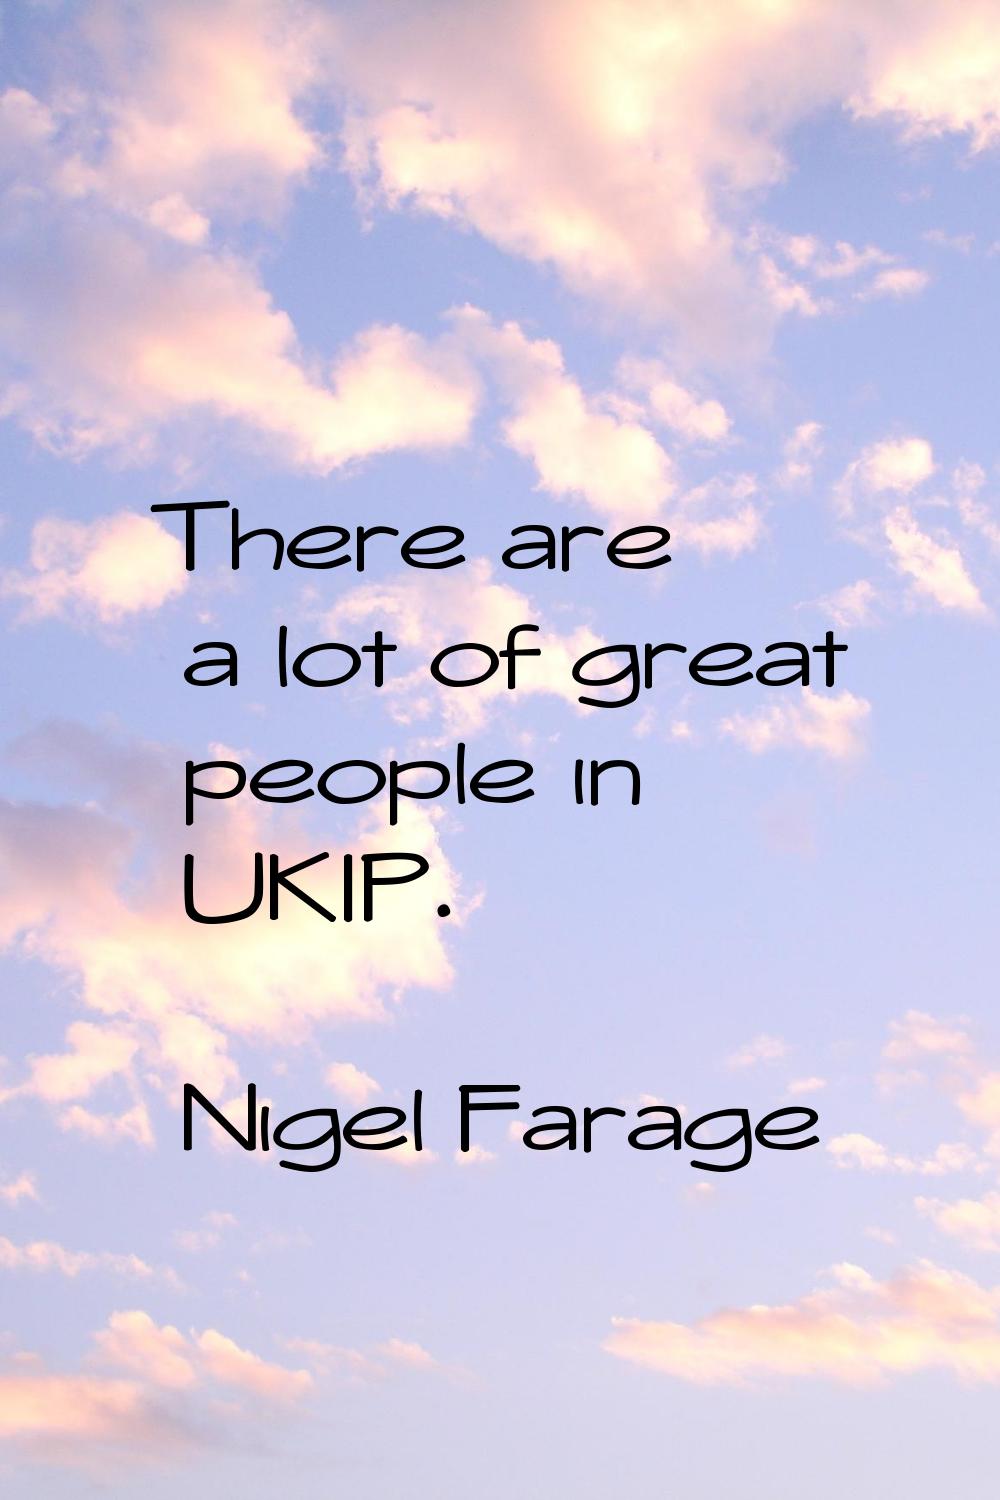 There are a lot of great people in UKIP.